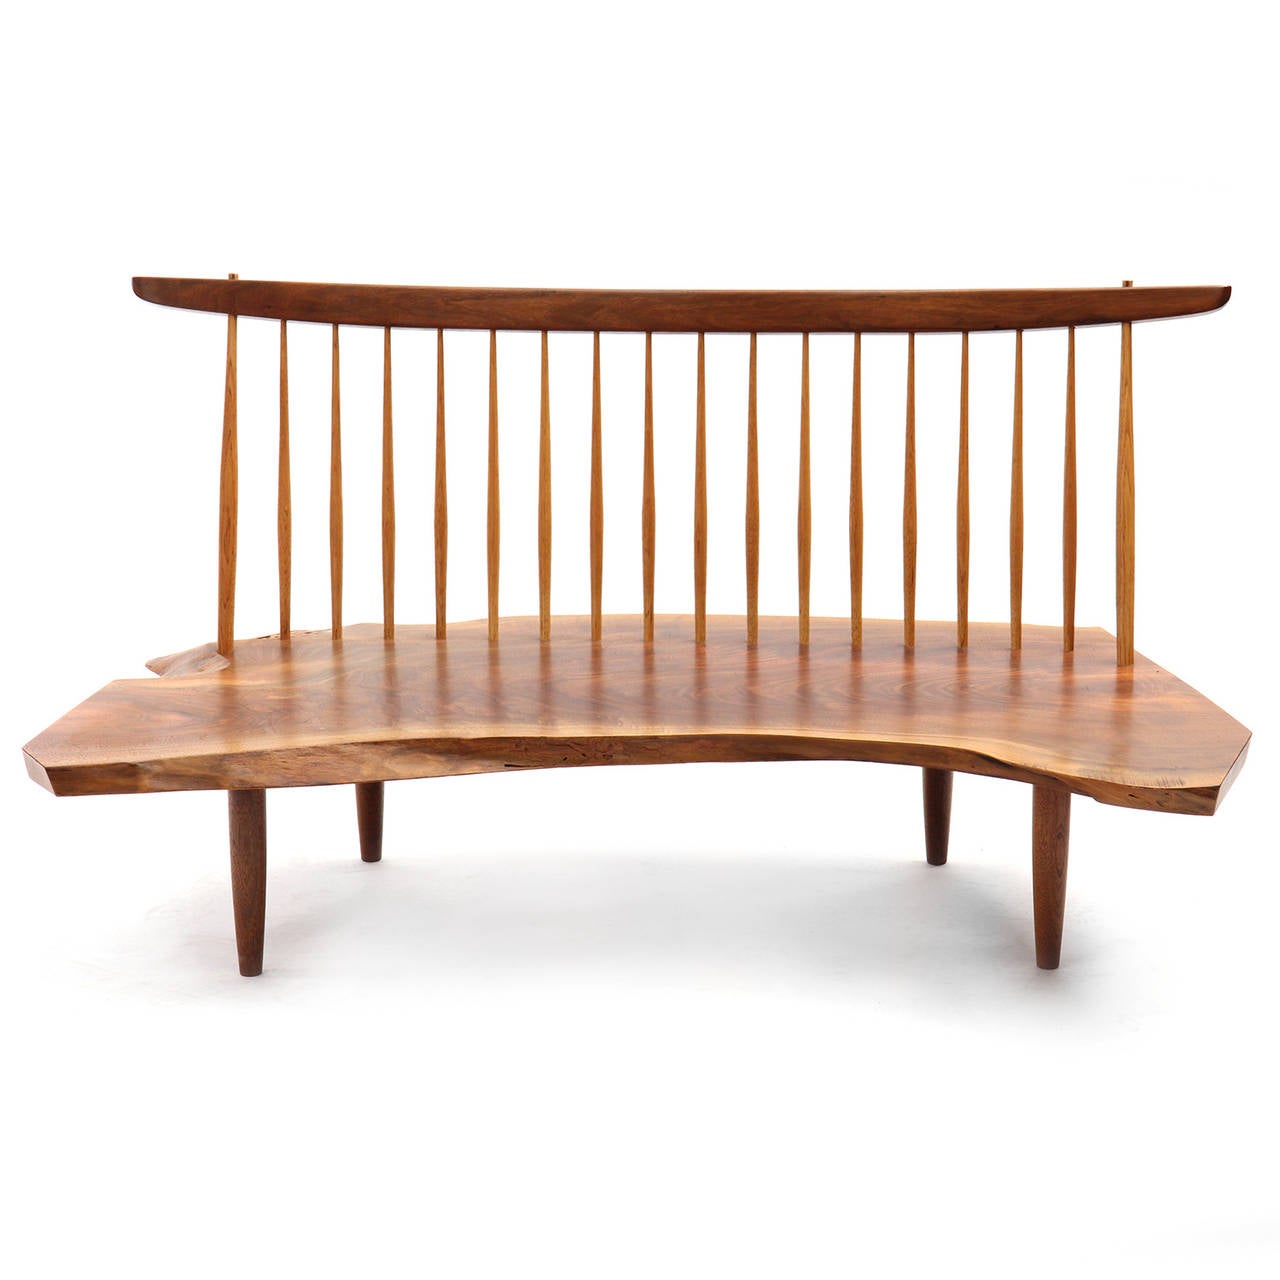 An impeccable studio-made Conoid bench having a highly expressive free edged single slab black walnut seat with hand hewn hickory spindles supporting  a sculpted walnut top rail, the seat element floating atop dowel form turned legs.

.